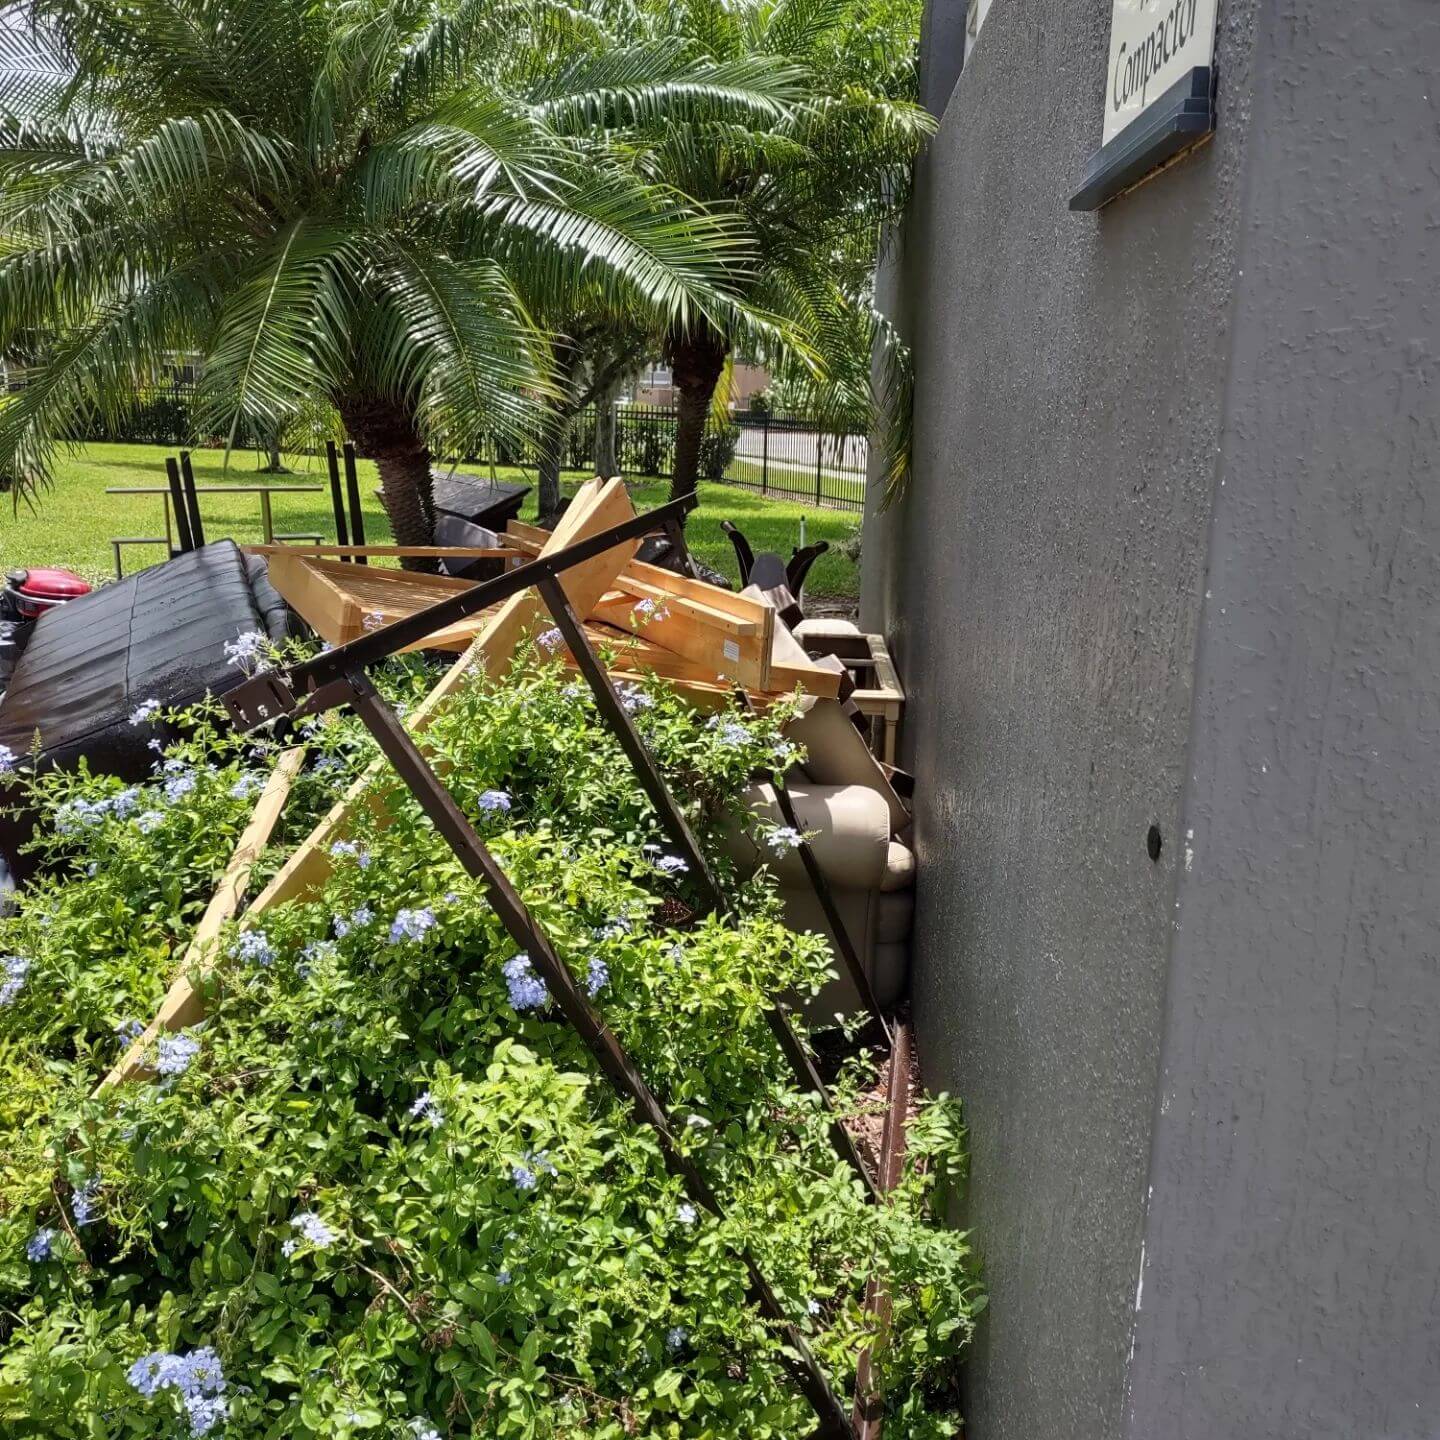 Residential Junk Removal-West Palm Beach Junk and Trash Removal Group